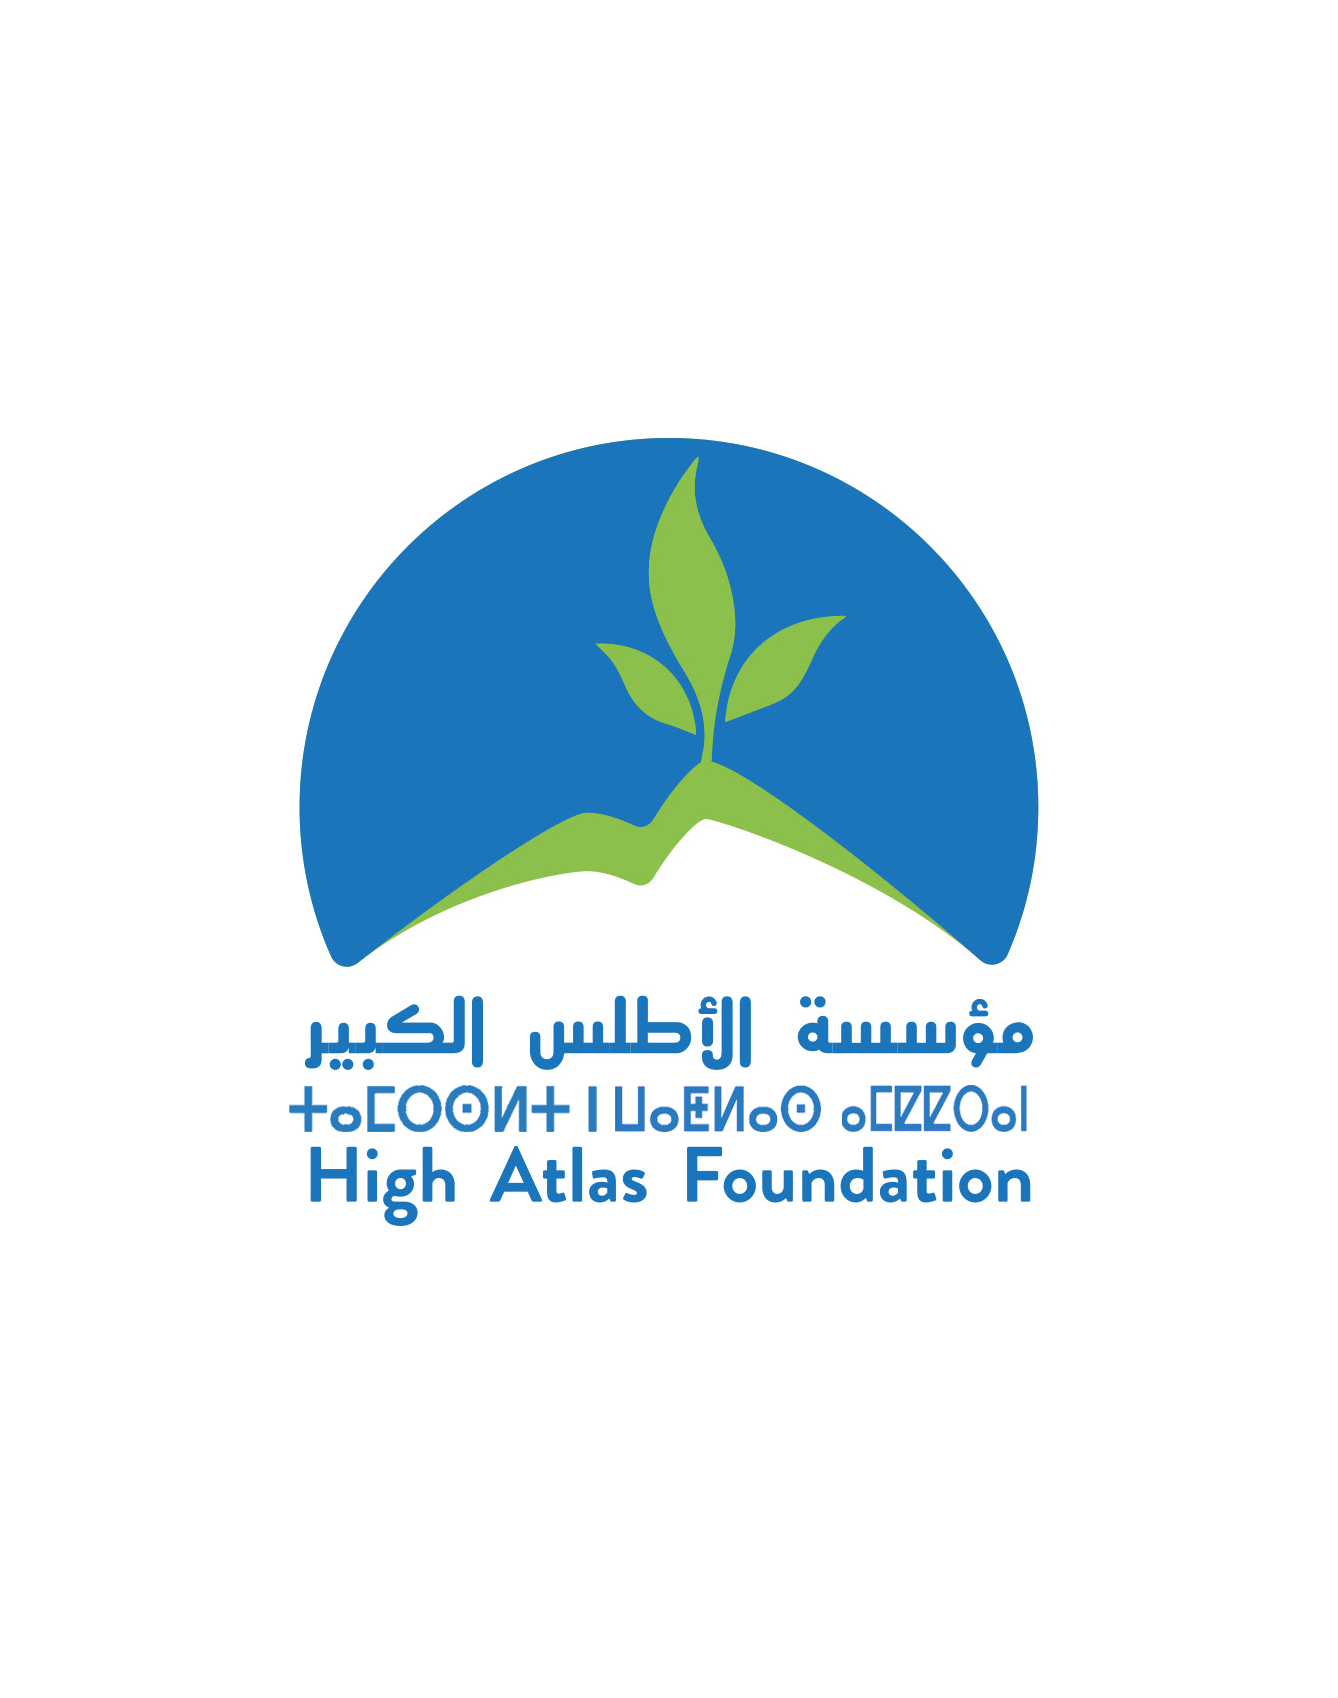 Join us in planting trees with the High Atlas Foundation